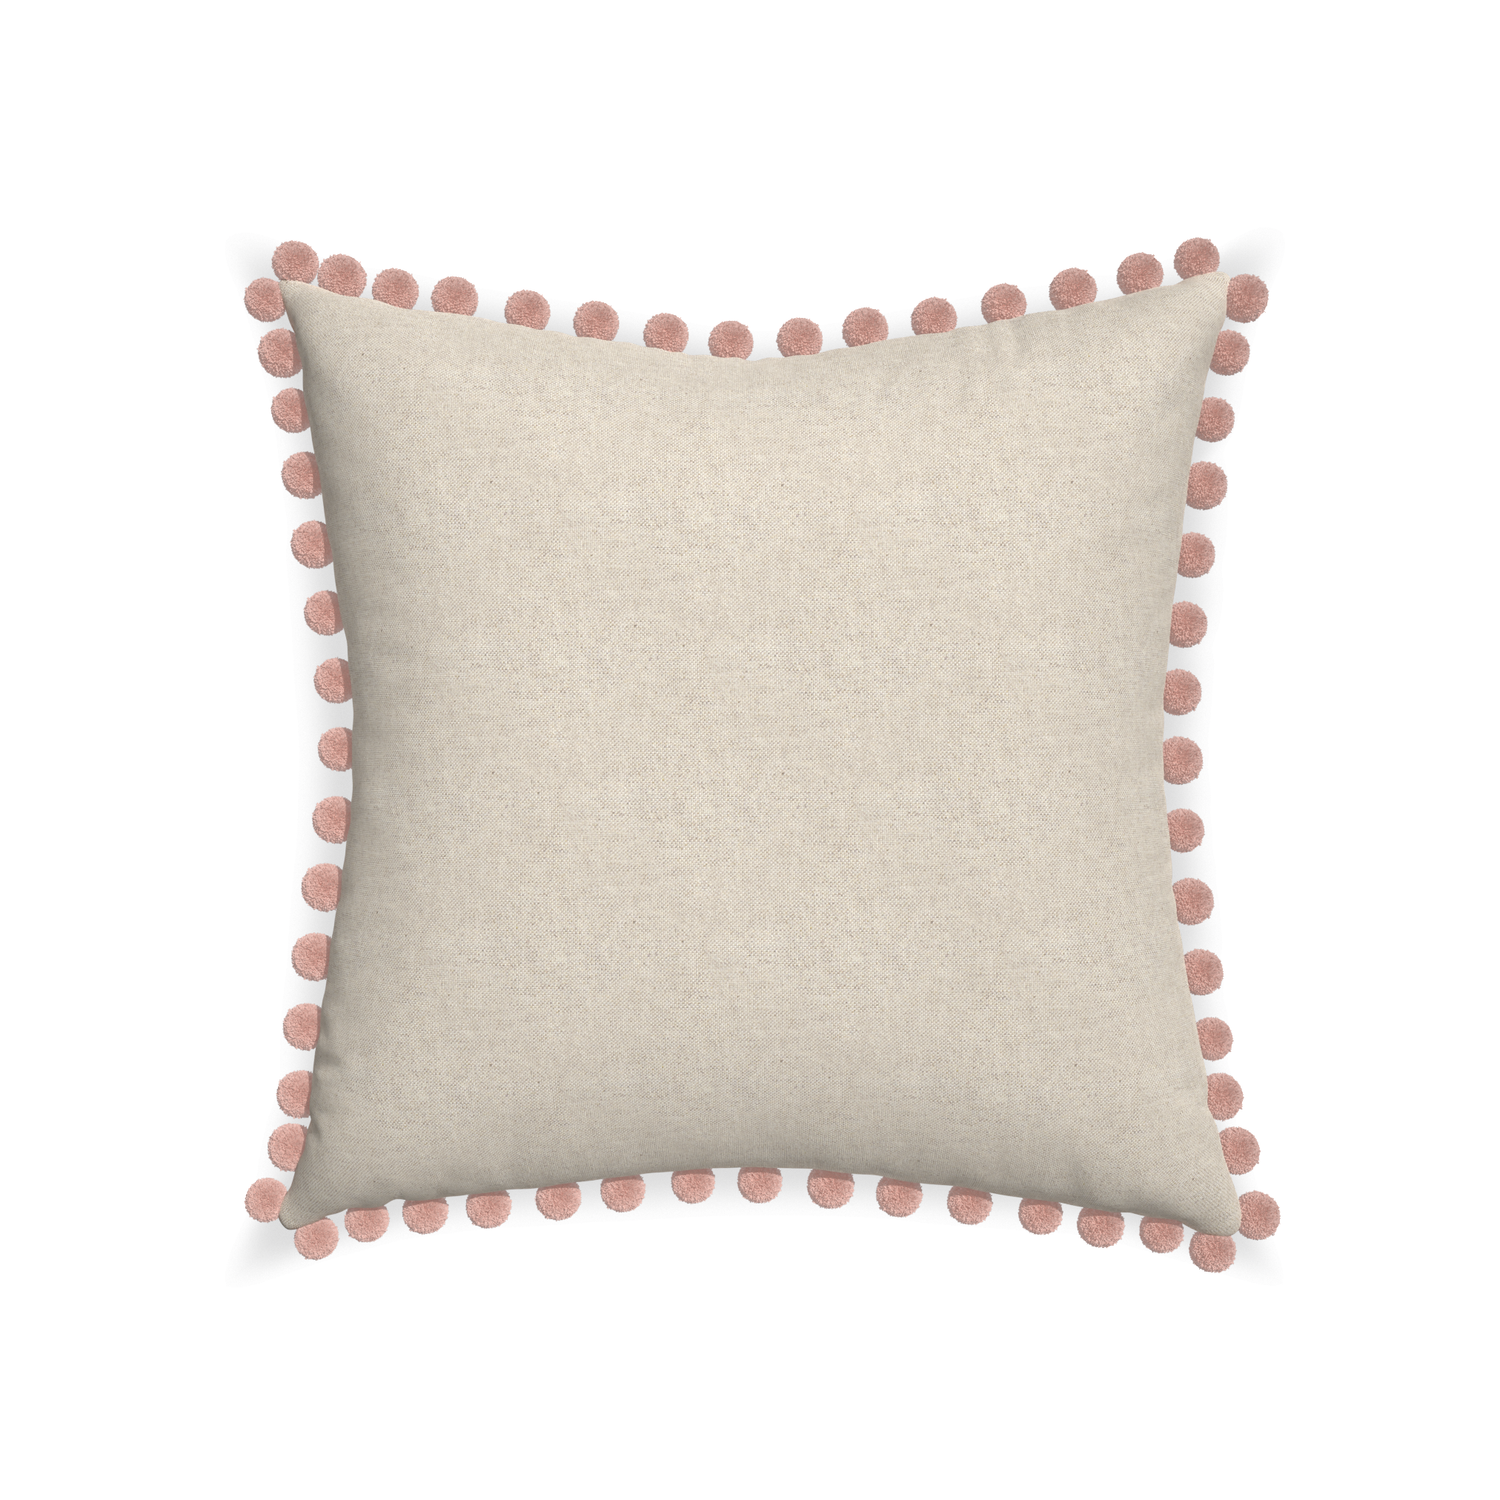 22-square oat custom light brownpillow with rose pom pom on white background